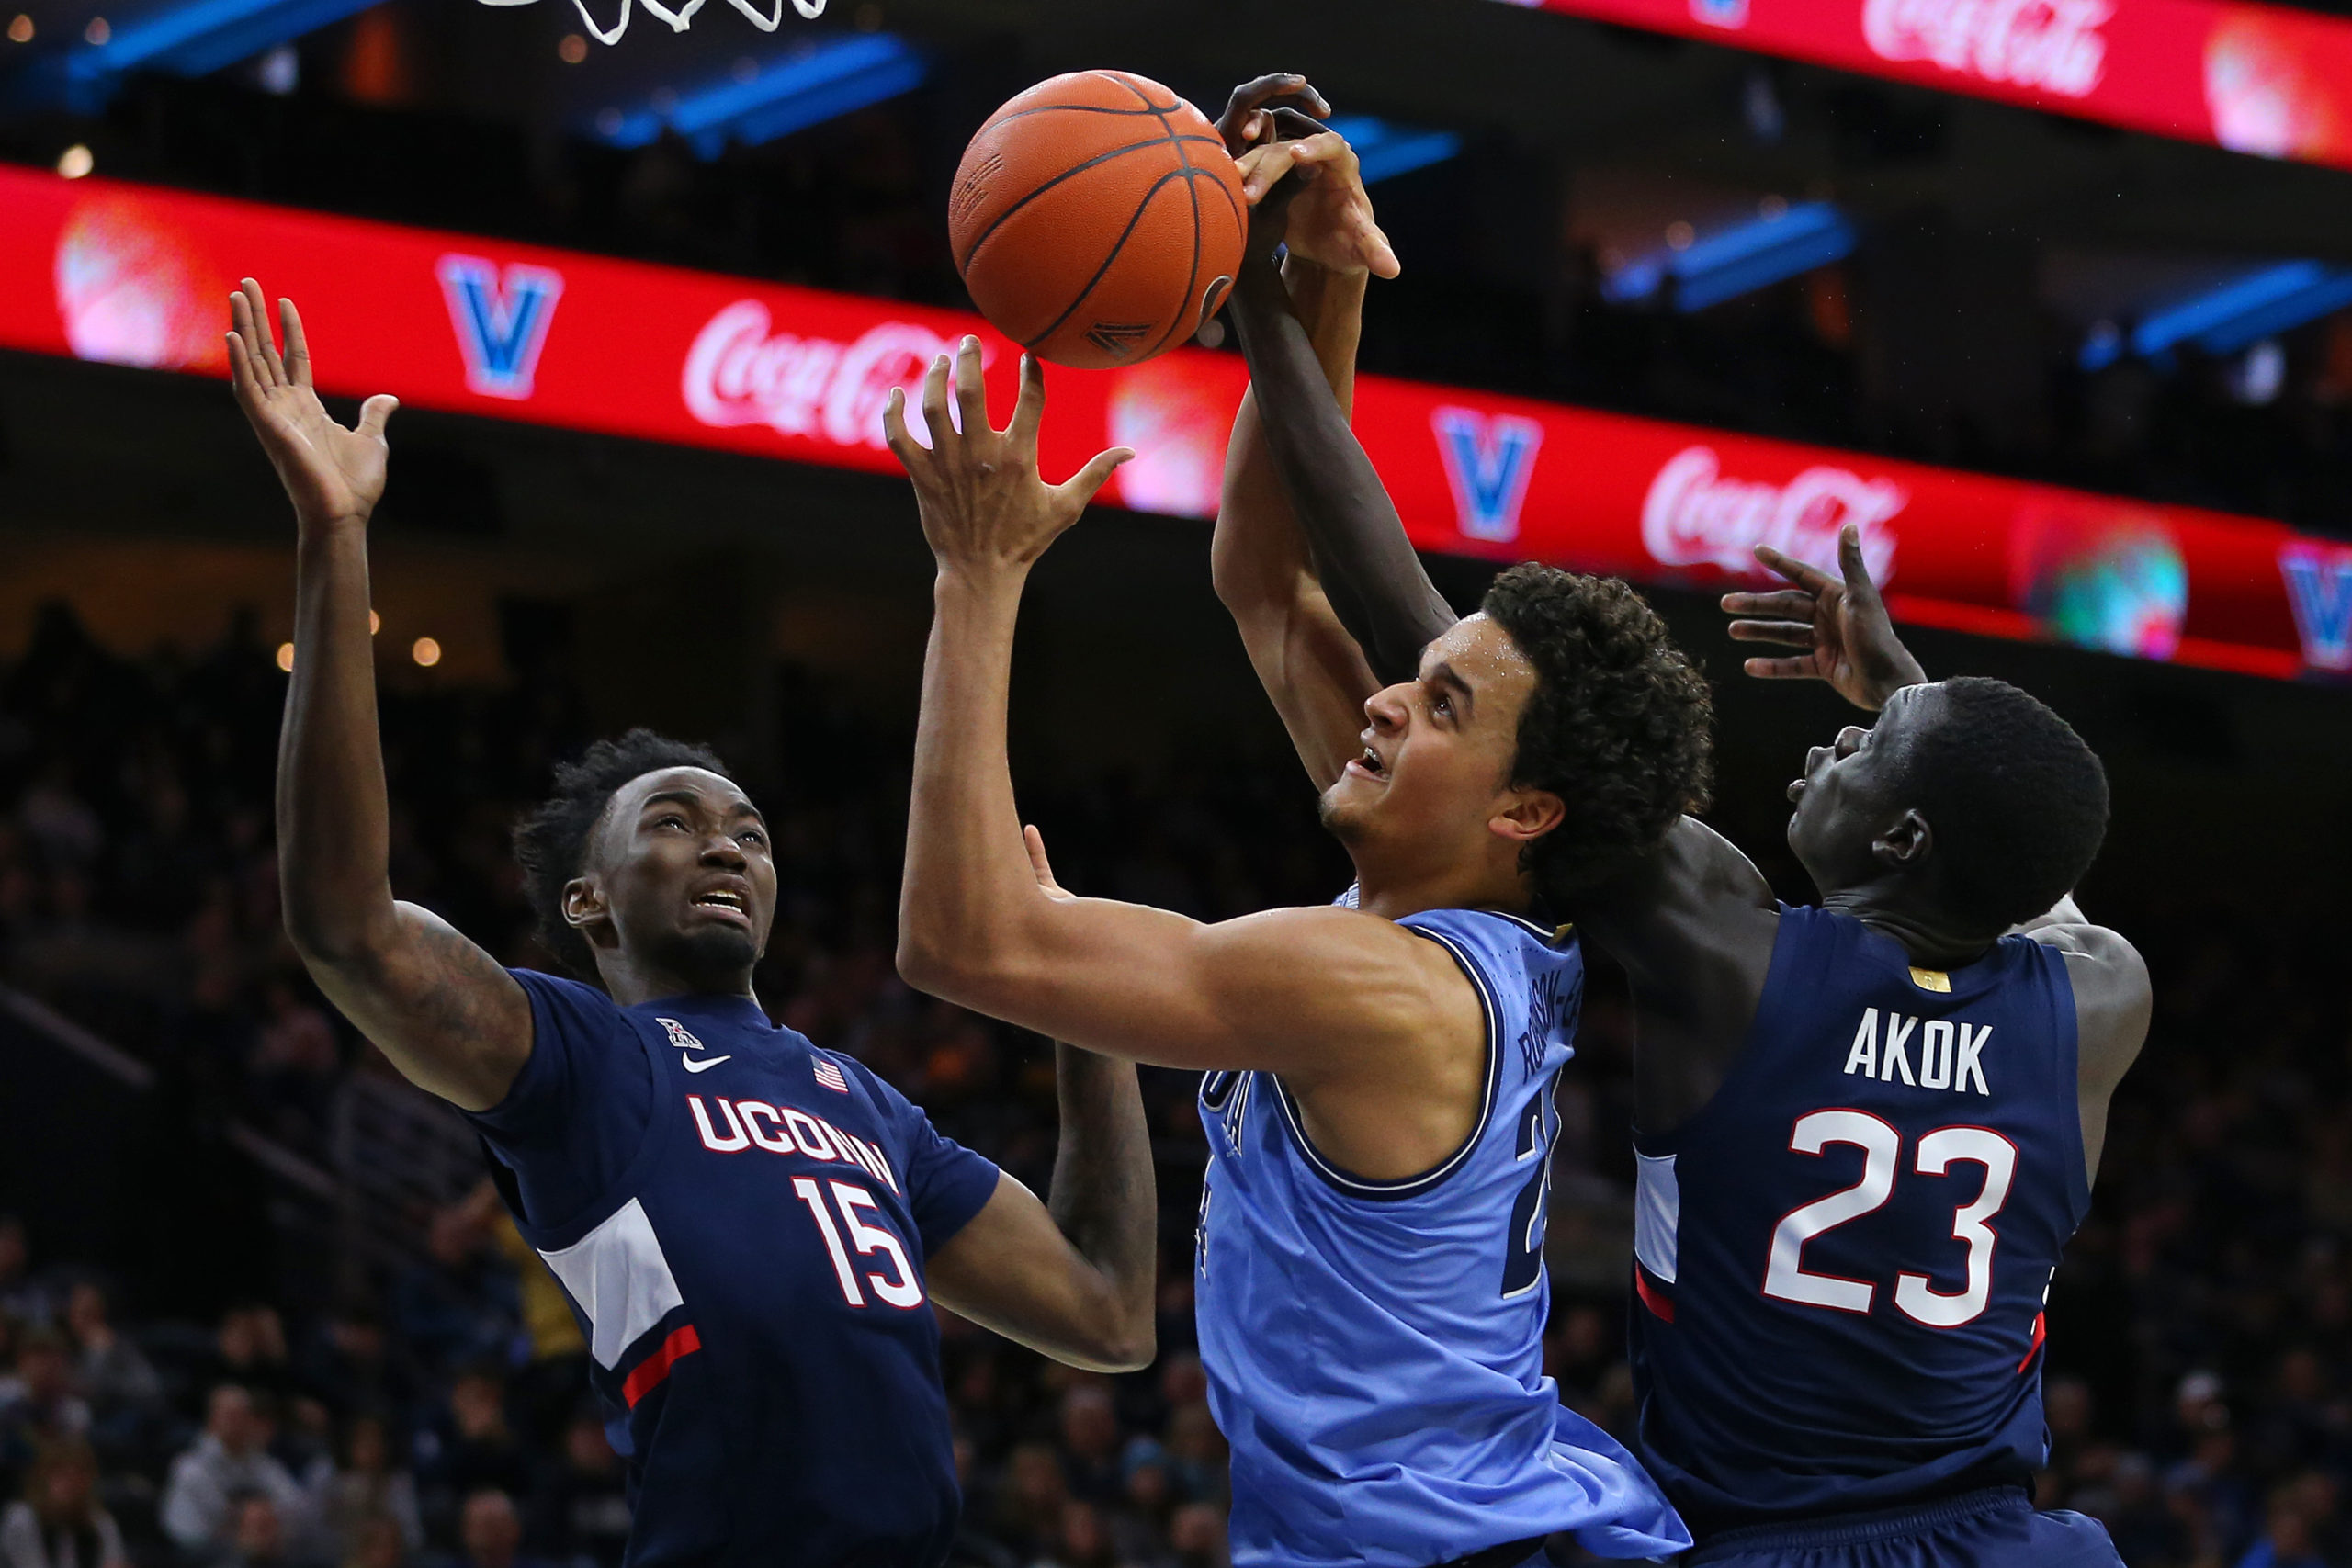 PHILADELPHIA, PA - JANUARY 18: Jermaine Samuels #23 of the Villanova Wildcats in action against Sidney Wilson #15 and Akok Akok #23 of the Connecticut Huskies during a college basketball game at Wells Fargo Center on January 18, 2020 in Philadelphia, Pennsylvania. (Photo by Rich Schultz/Getty Images)